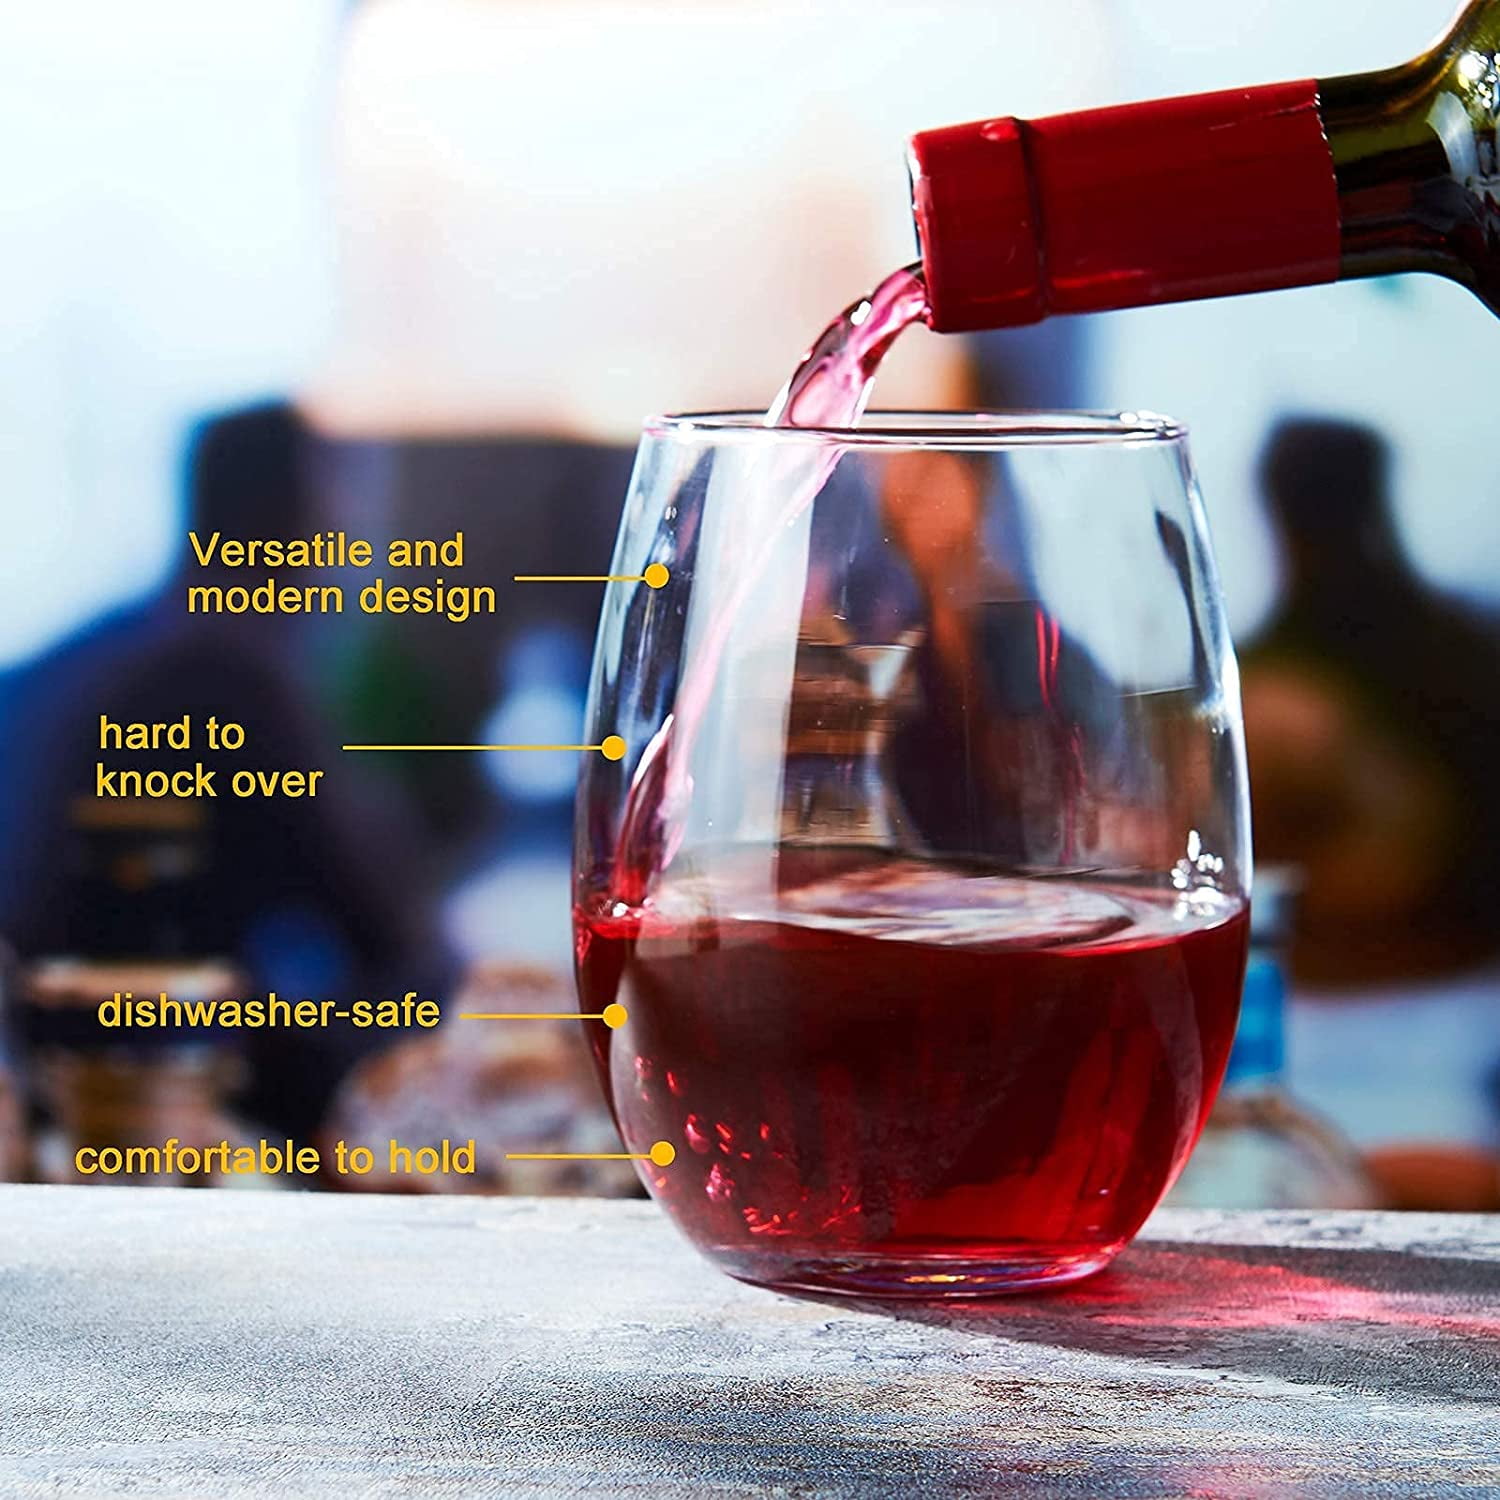 What Is the Best Glass to Drink Red Wine From? - Glass.com